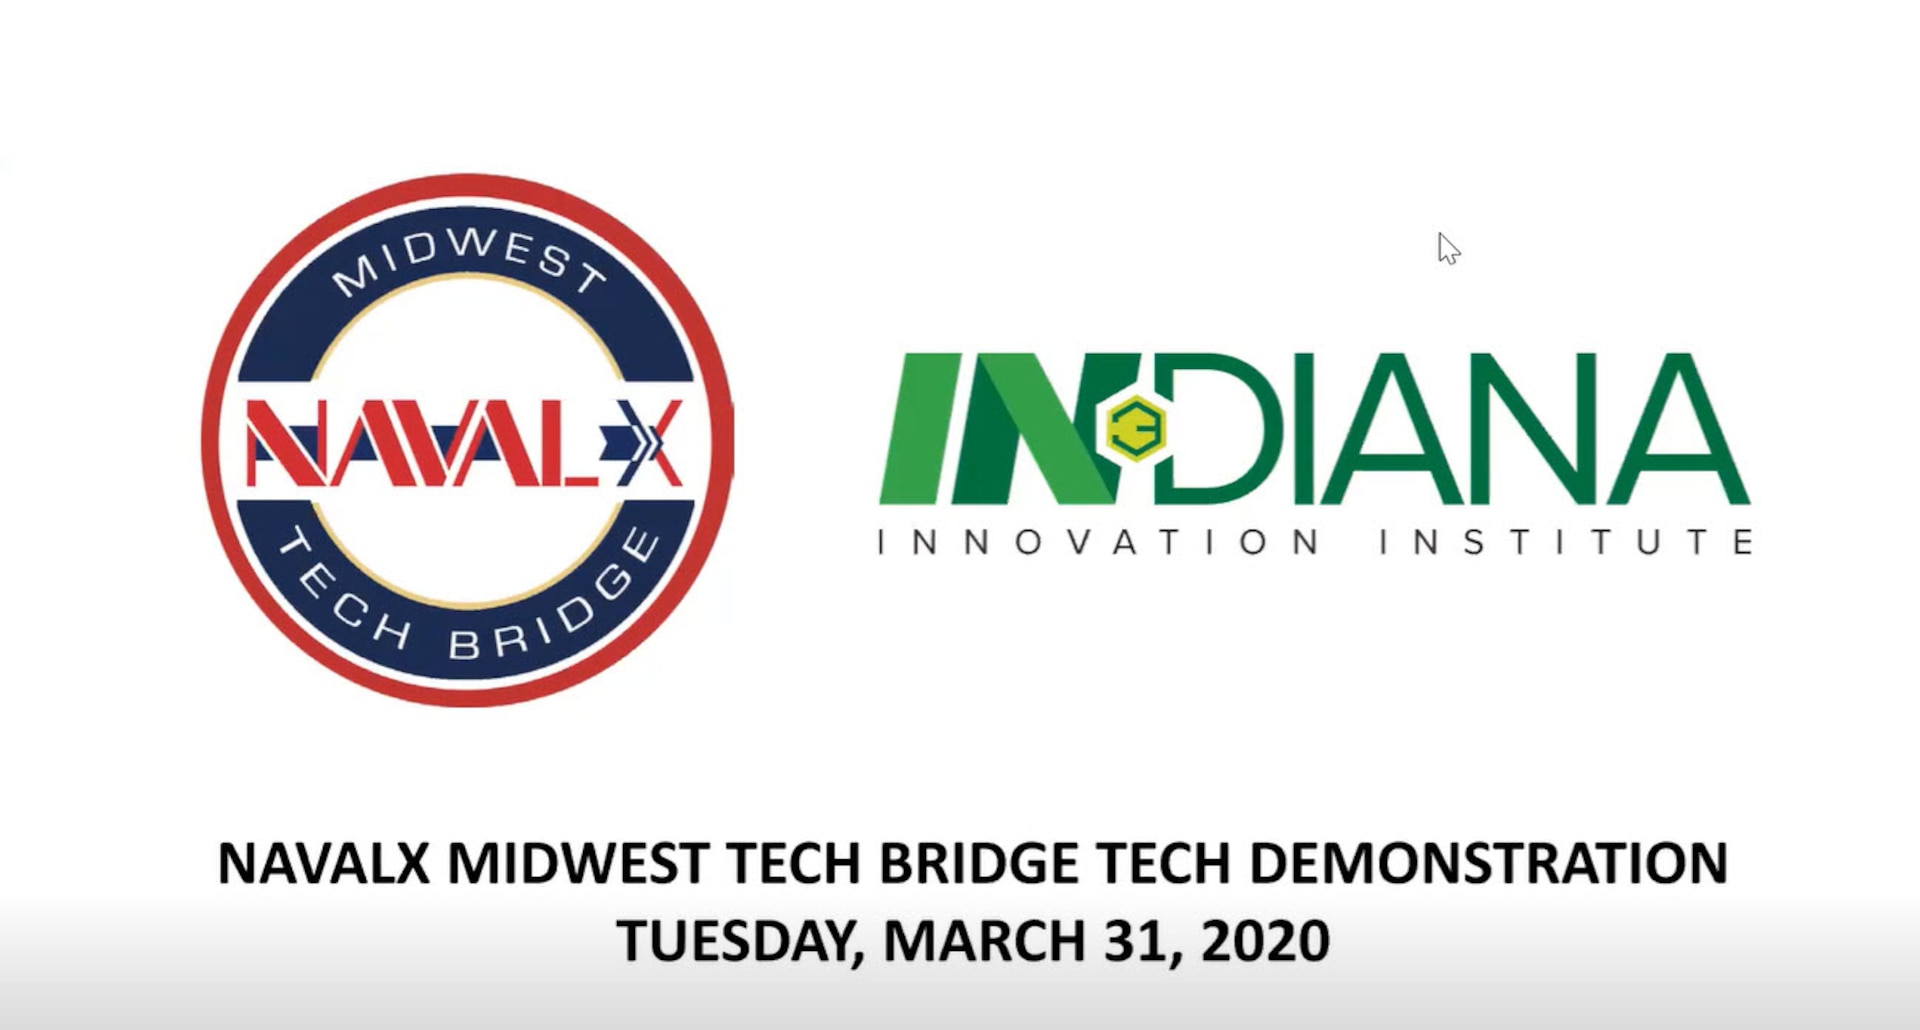 The NavalX Midwest Tech Bridge and Indiana Innovation Institute (IN3) hosted their first technology demonstration featuring companies across the Hoosier state.